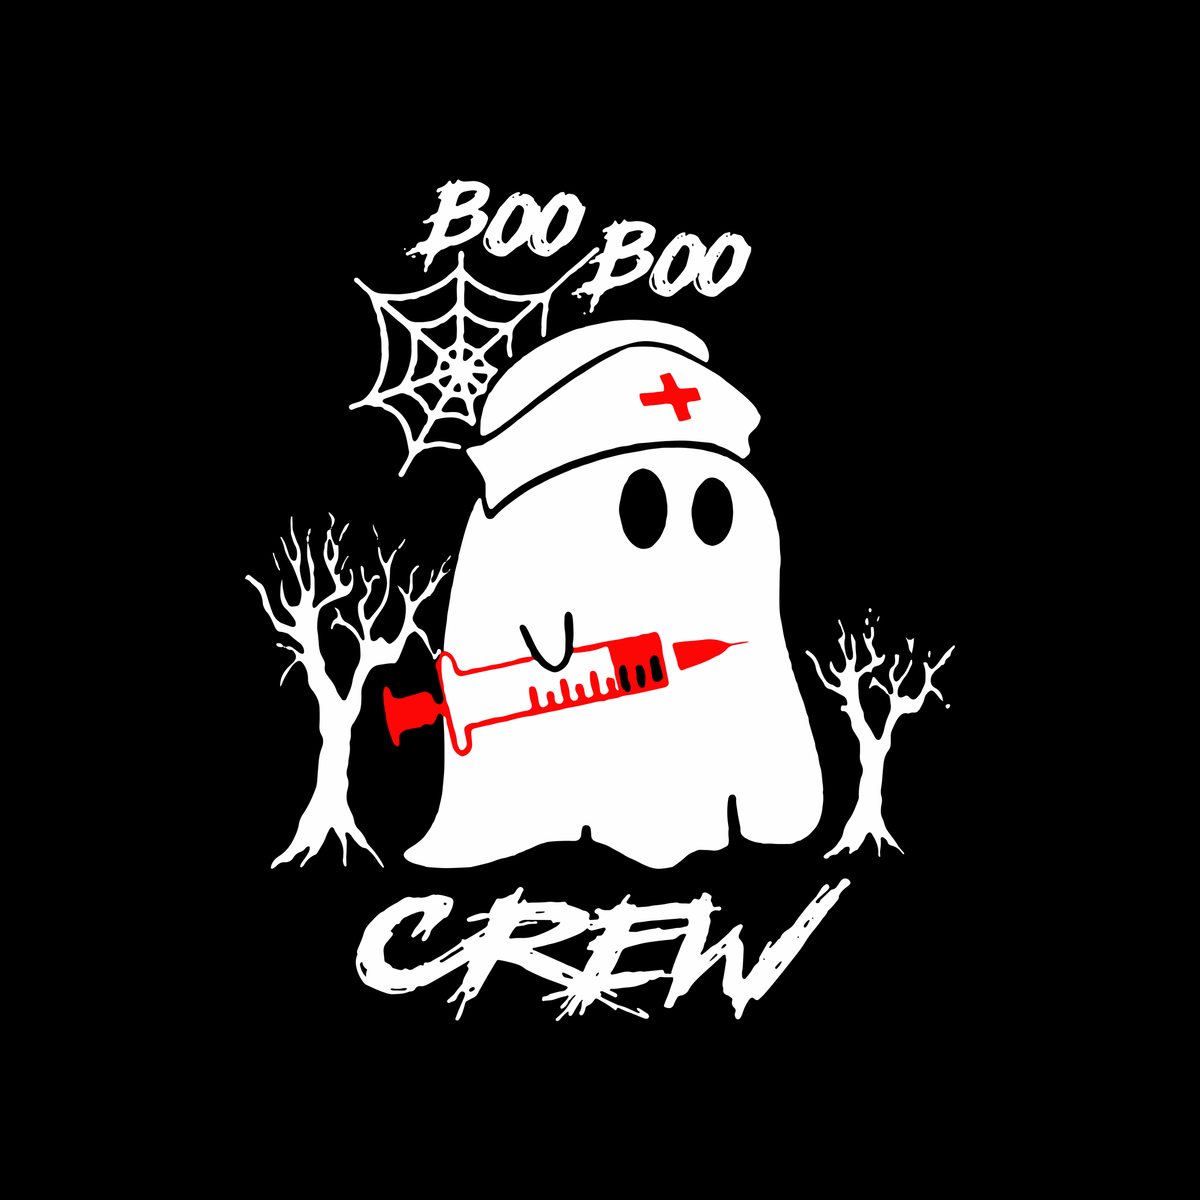 Boo boo crew, boo boo crew svg, boo boo crew tshirt,Boo bees svg, boo ...